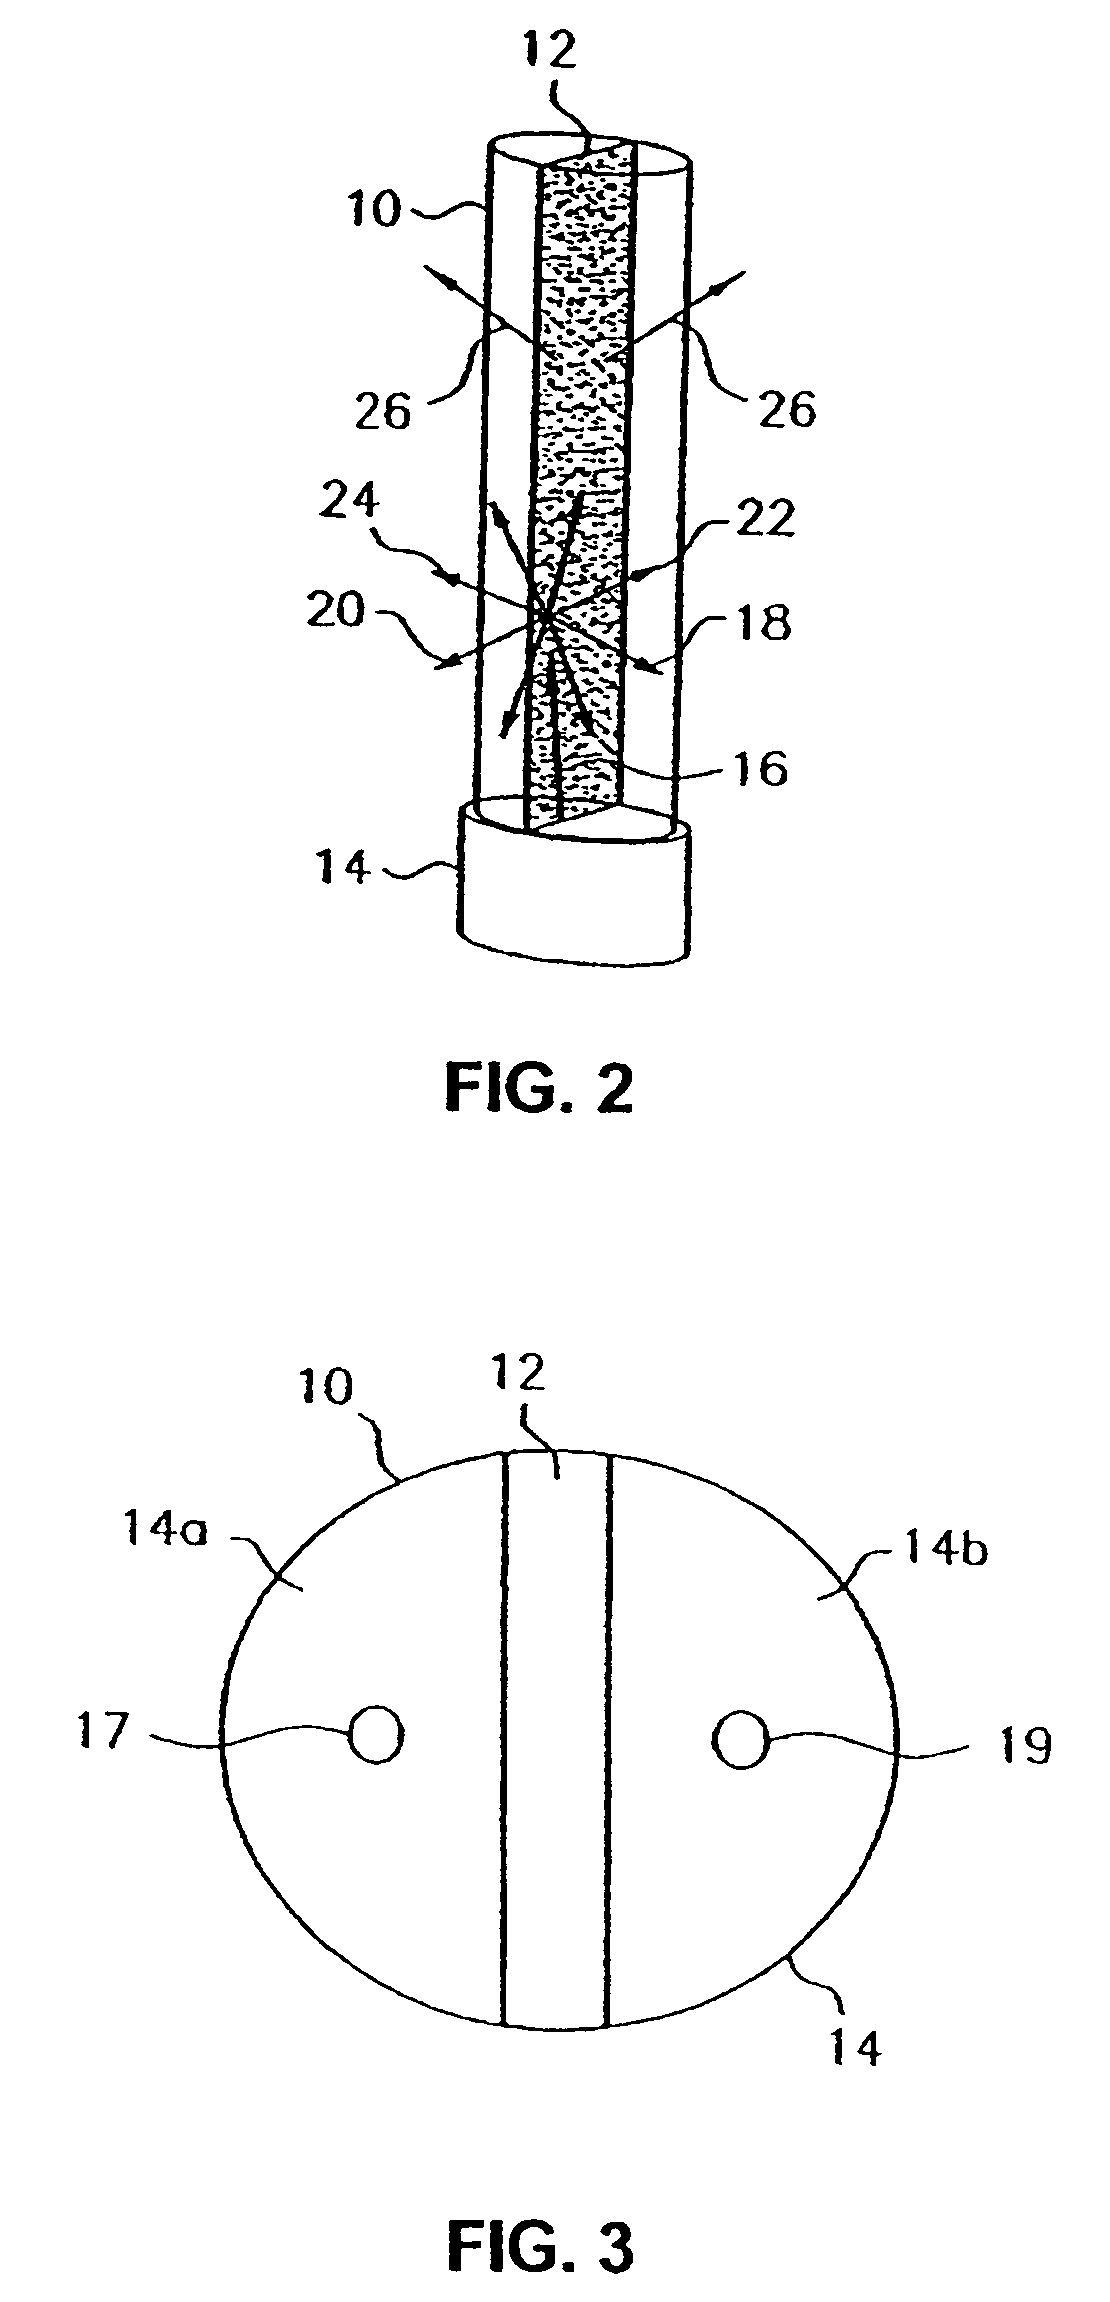 Lighting system using multiple colored light emitting sources and diffuser element